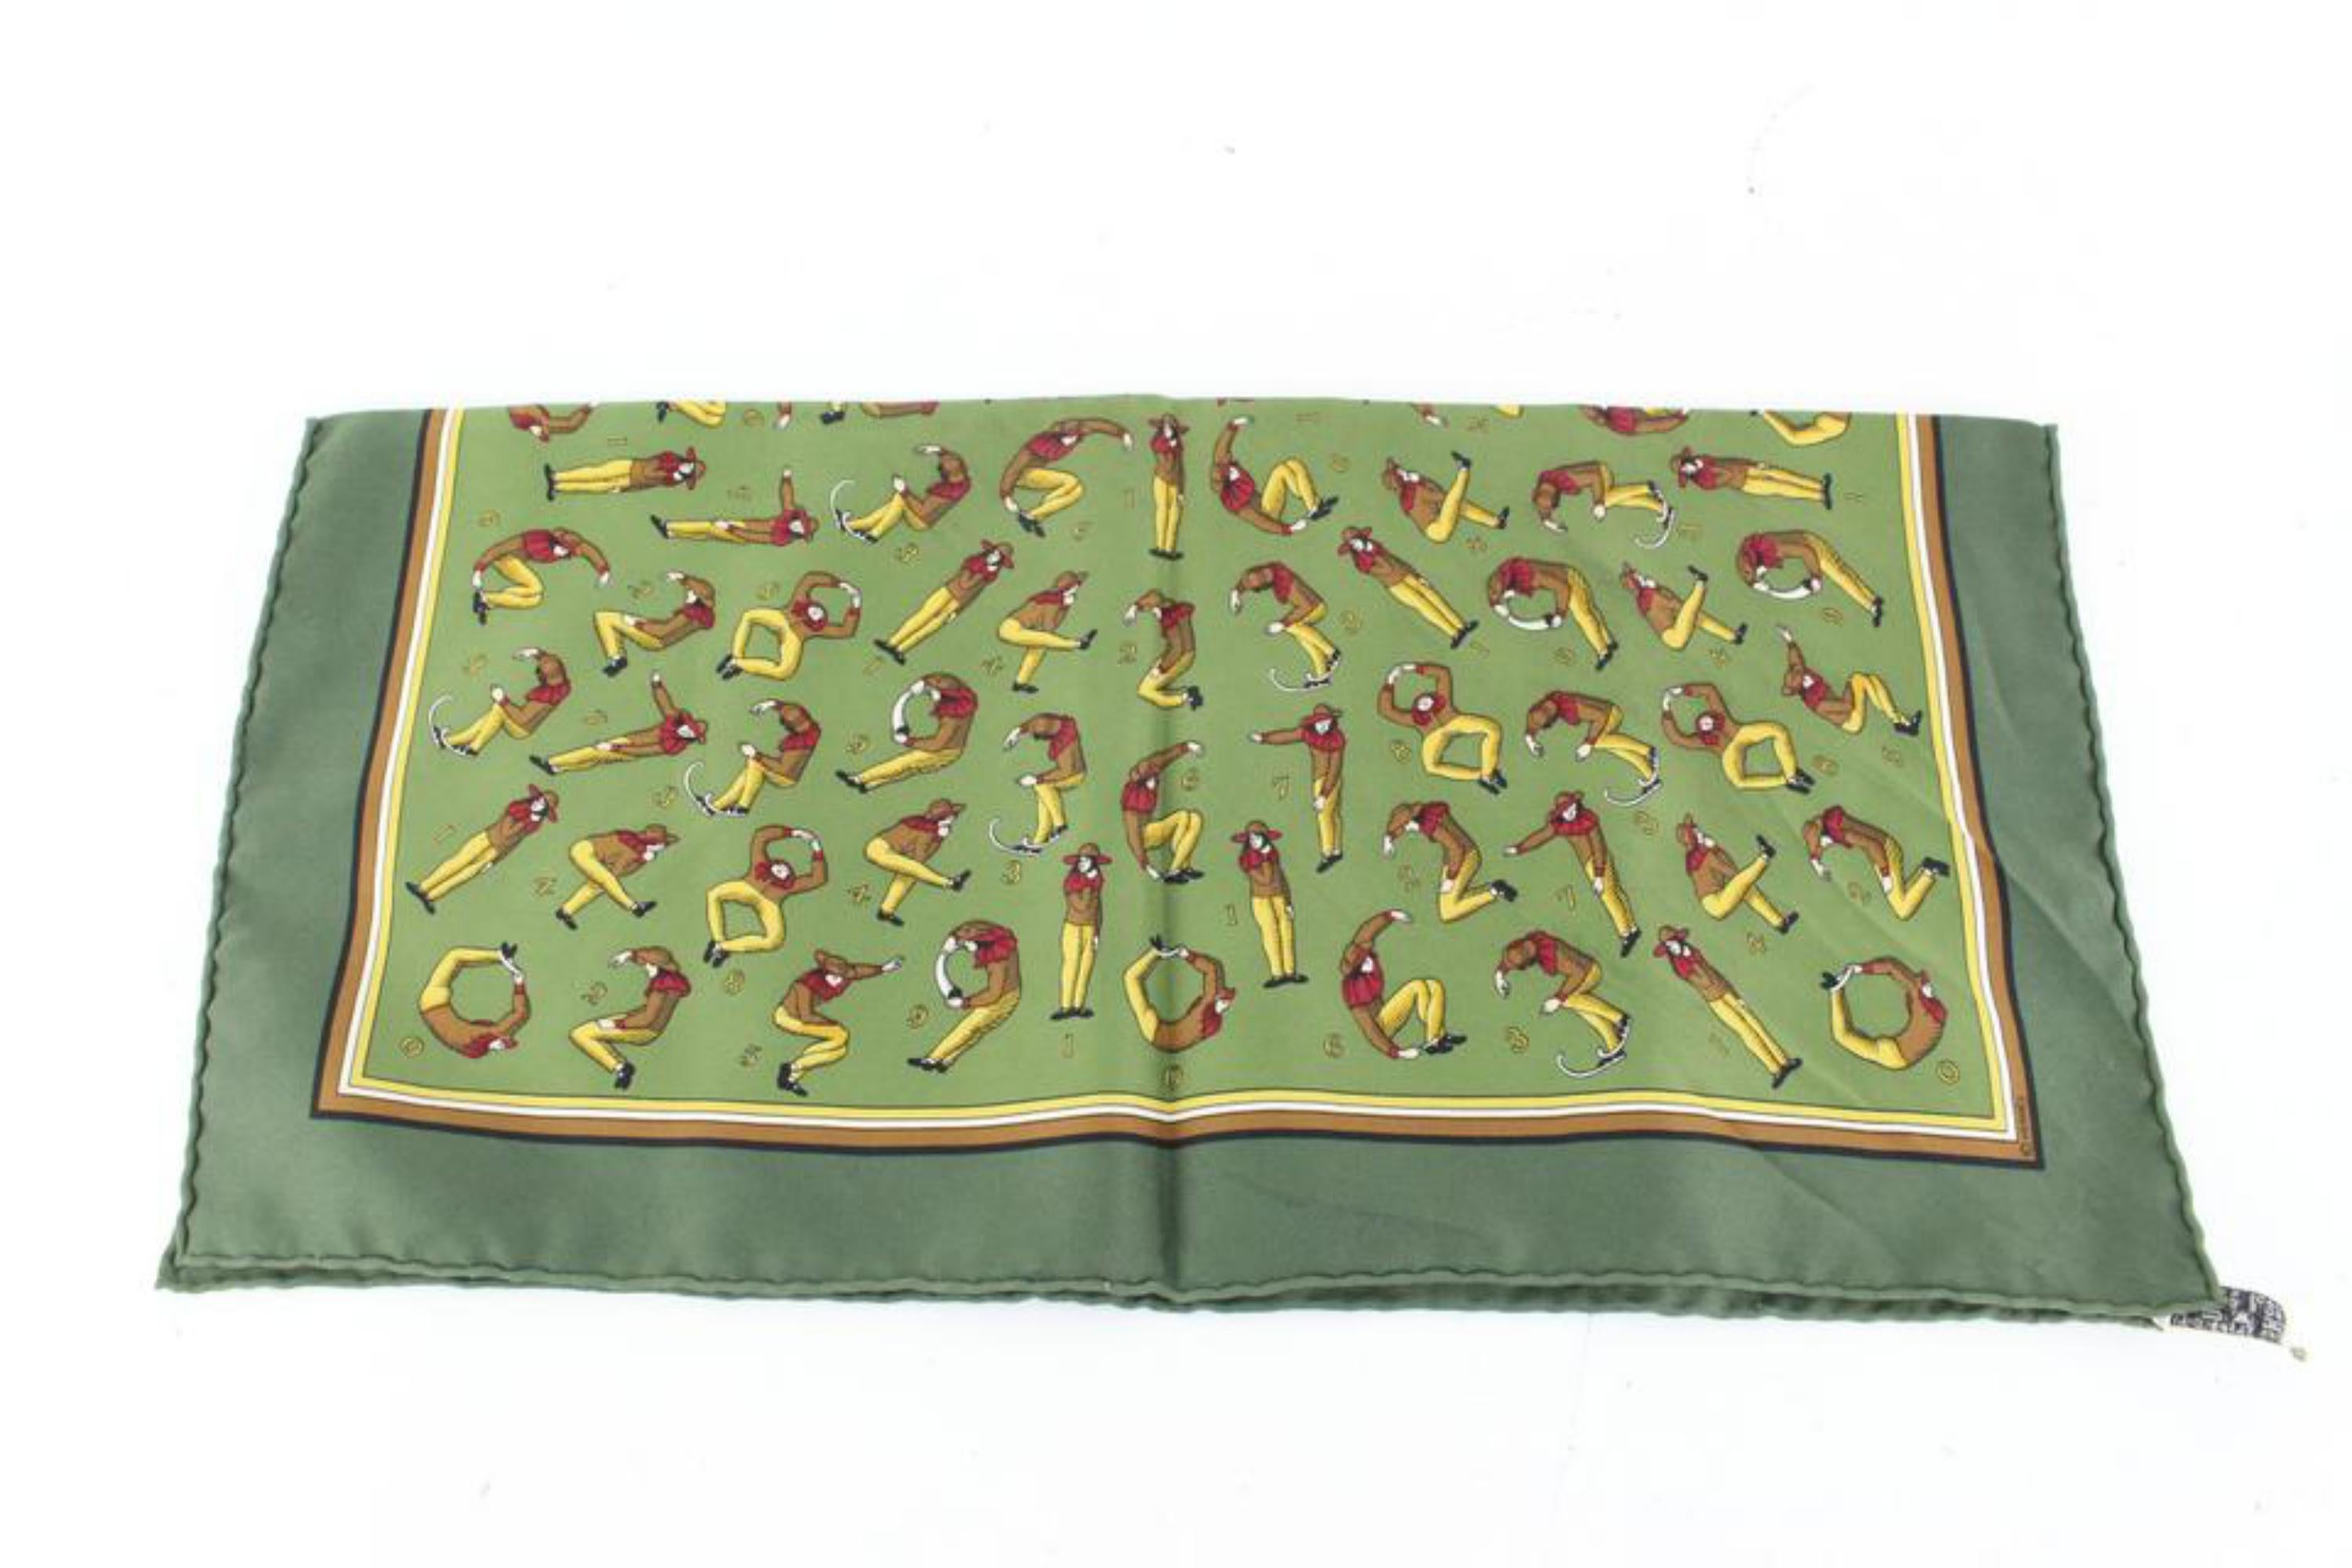 Hermès Green Man Stretch Pose Yoga Silk Scarf  48h428s In Excellent Condition For Sale In Dix hills, NY